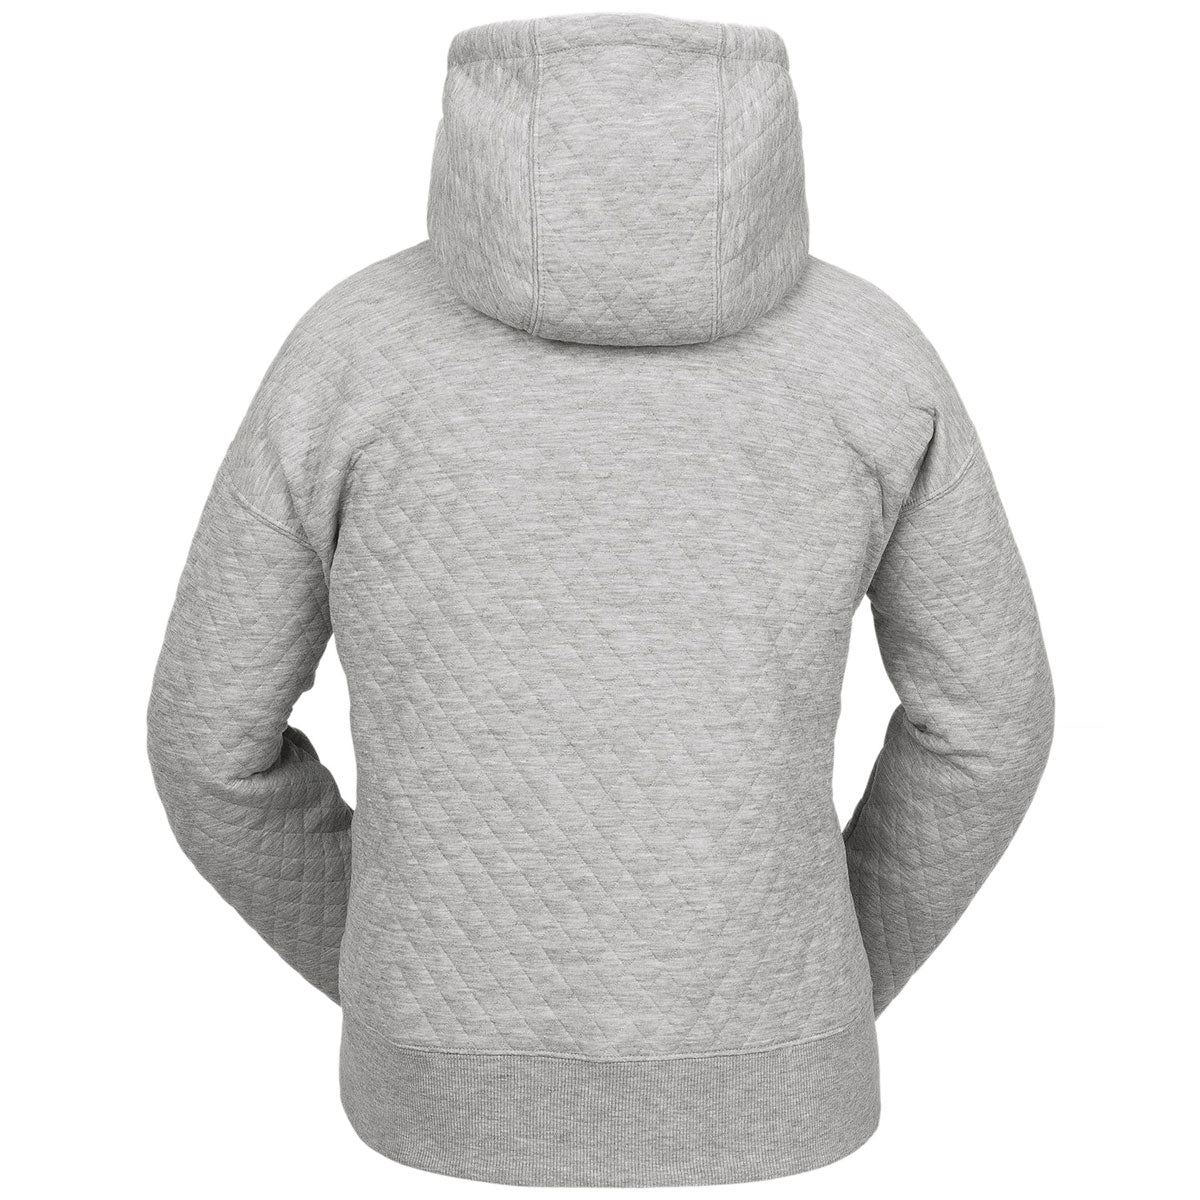 Volcom Womens V.co Air Layer Thermal Hoodie - Heather Grey image 2